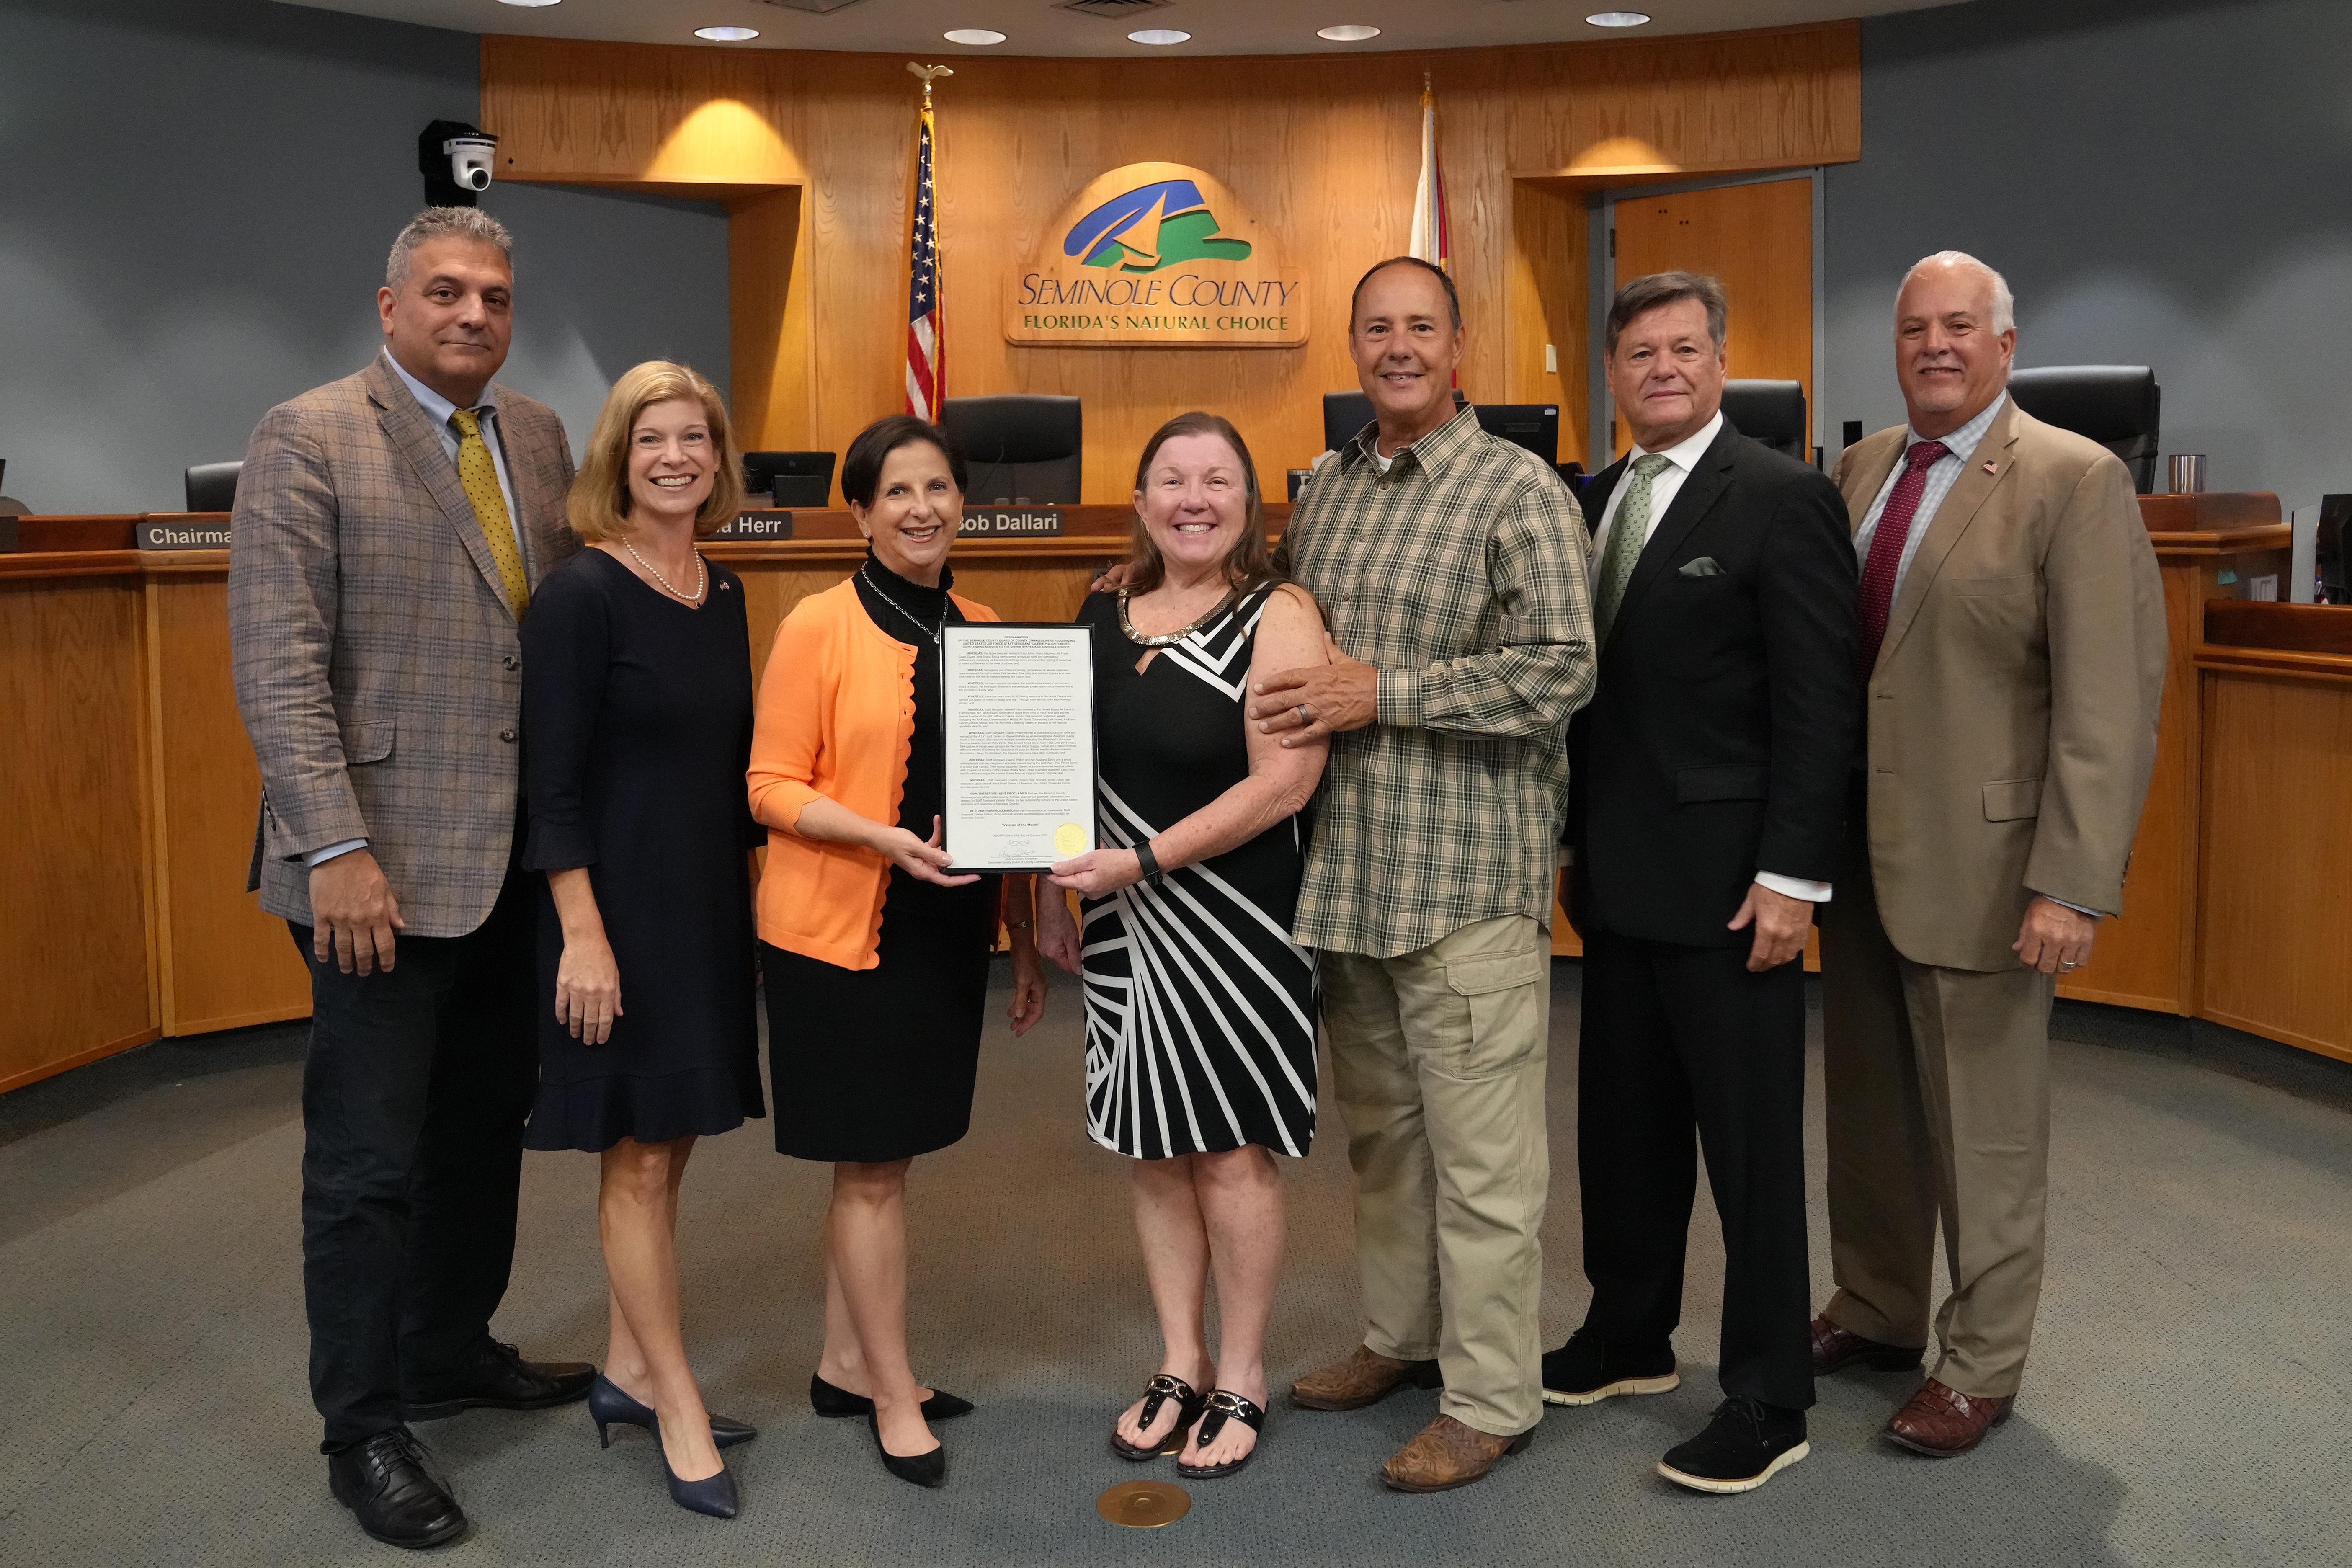 Proclaiming Staff Sergeant Valerie Philon, United States Air Force as Seminole County's October Veteran of the Month. (Staff Sergeant Valerie Philon, United States Air Force)